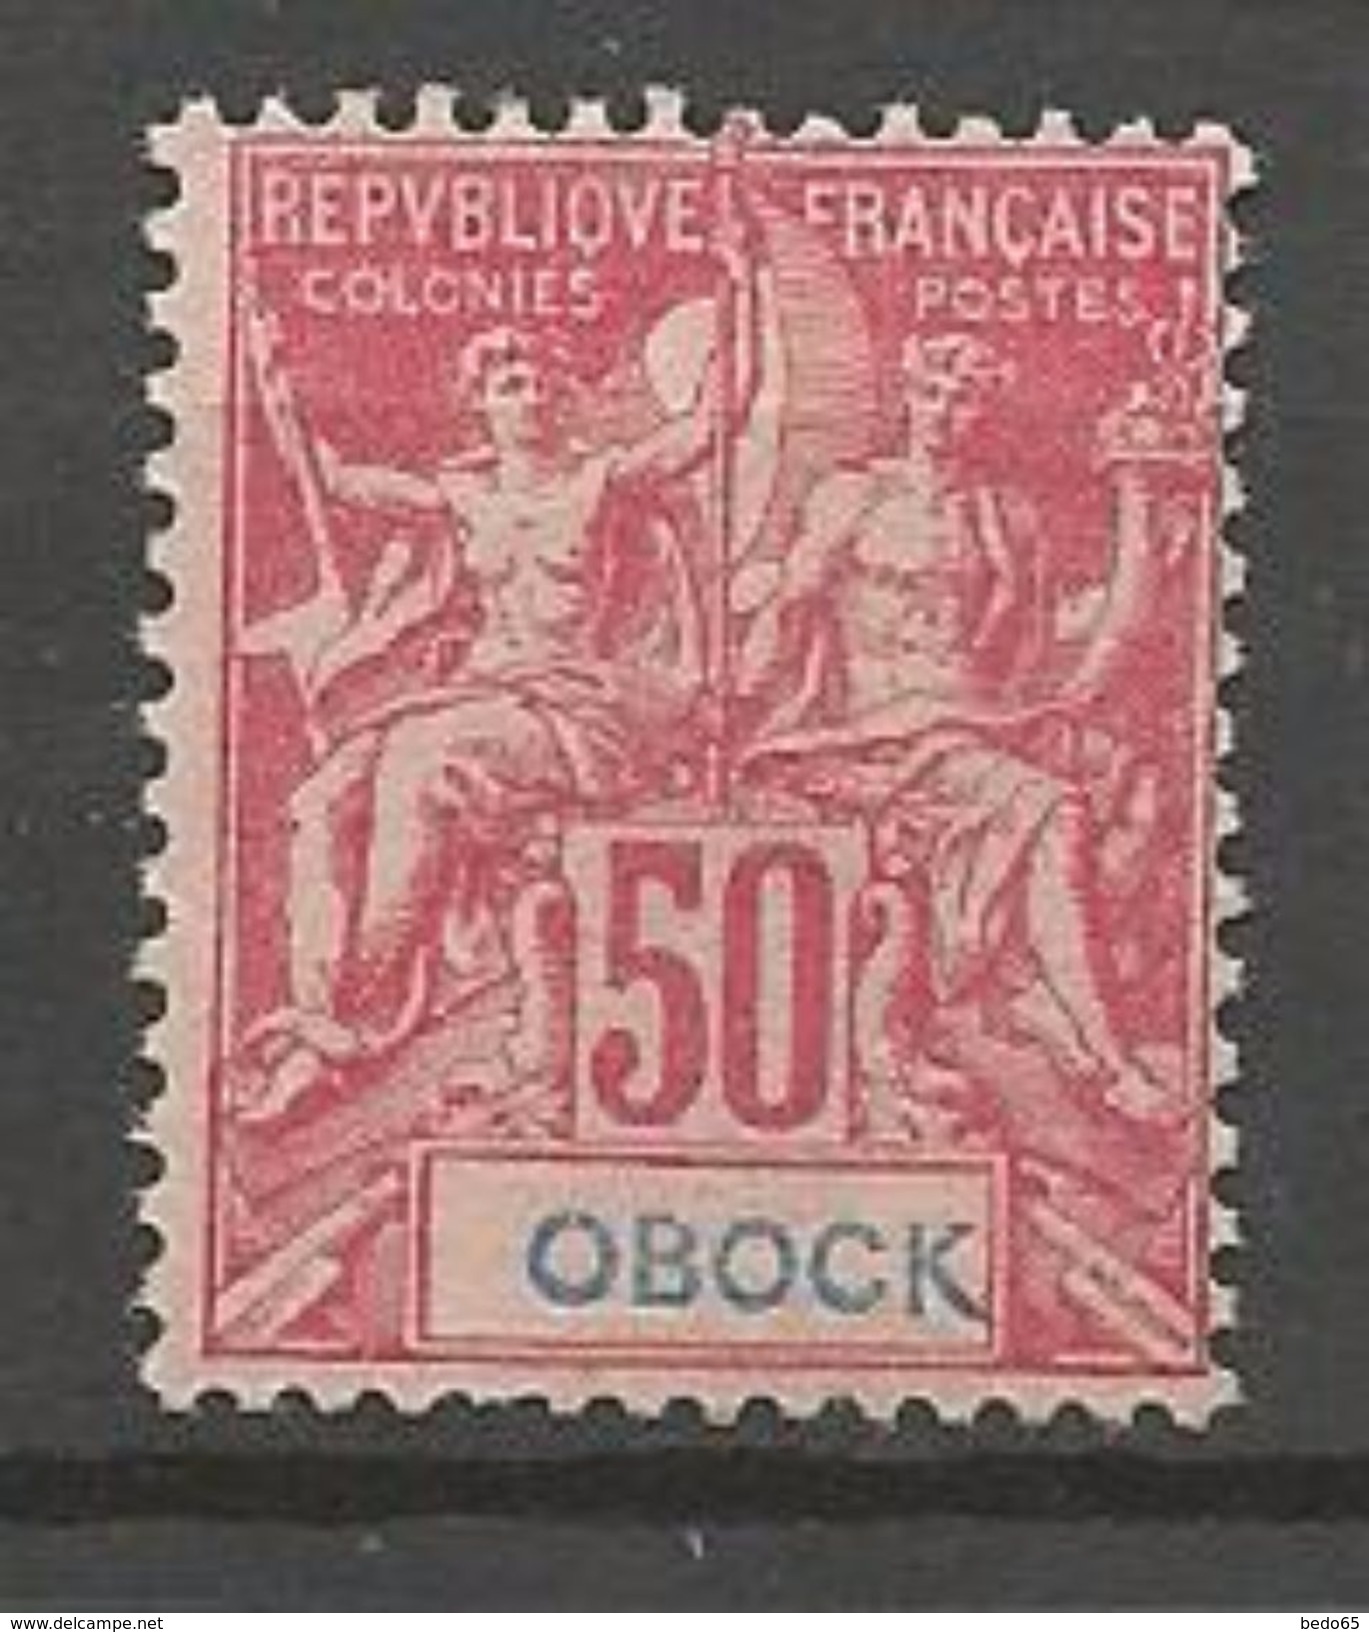 OBOCK N° 42 NEUF* TRACE DE CHARNIERE TB / MH - Unused Stamps